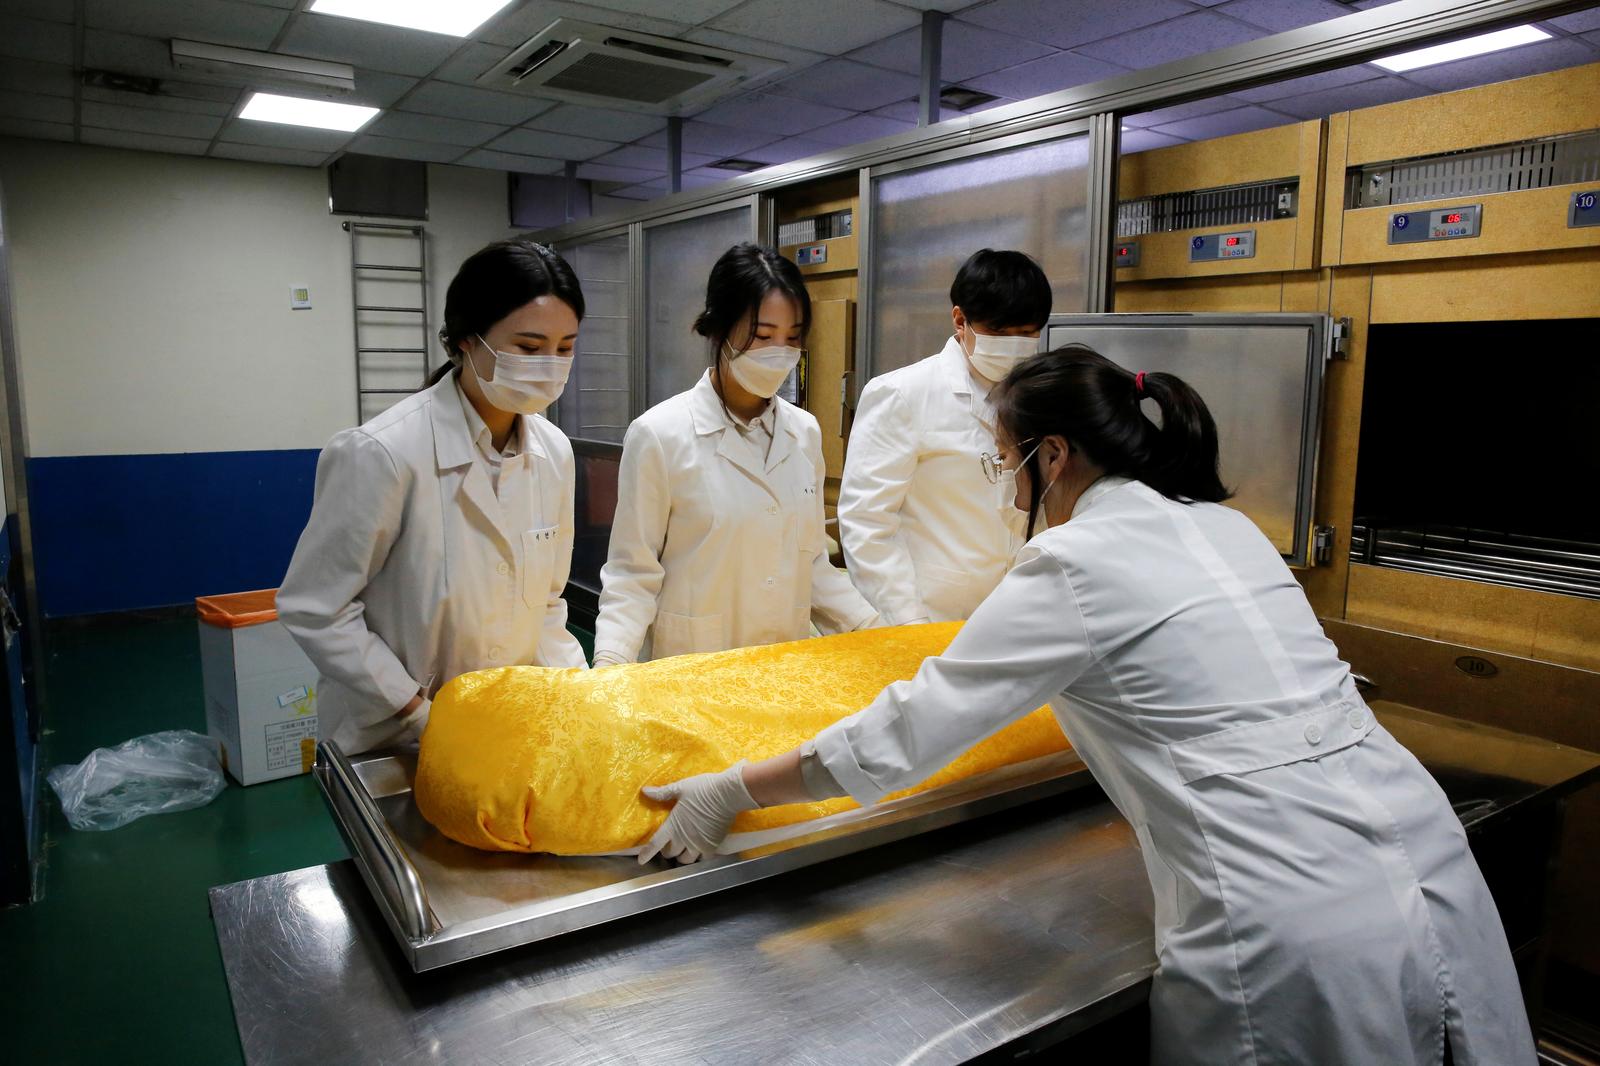 Park Bo-ram, a funeral director, moves the body of a deceased at a funeral home in a medical center in Seoul, South Korea, November 4, 2020. Photo: Reuters